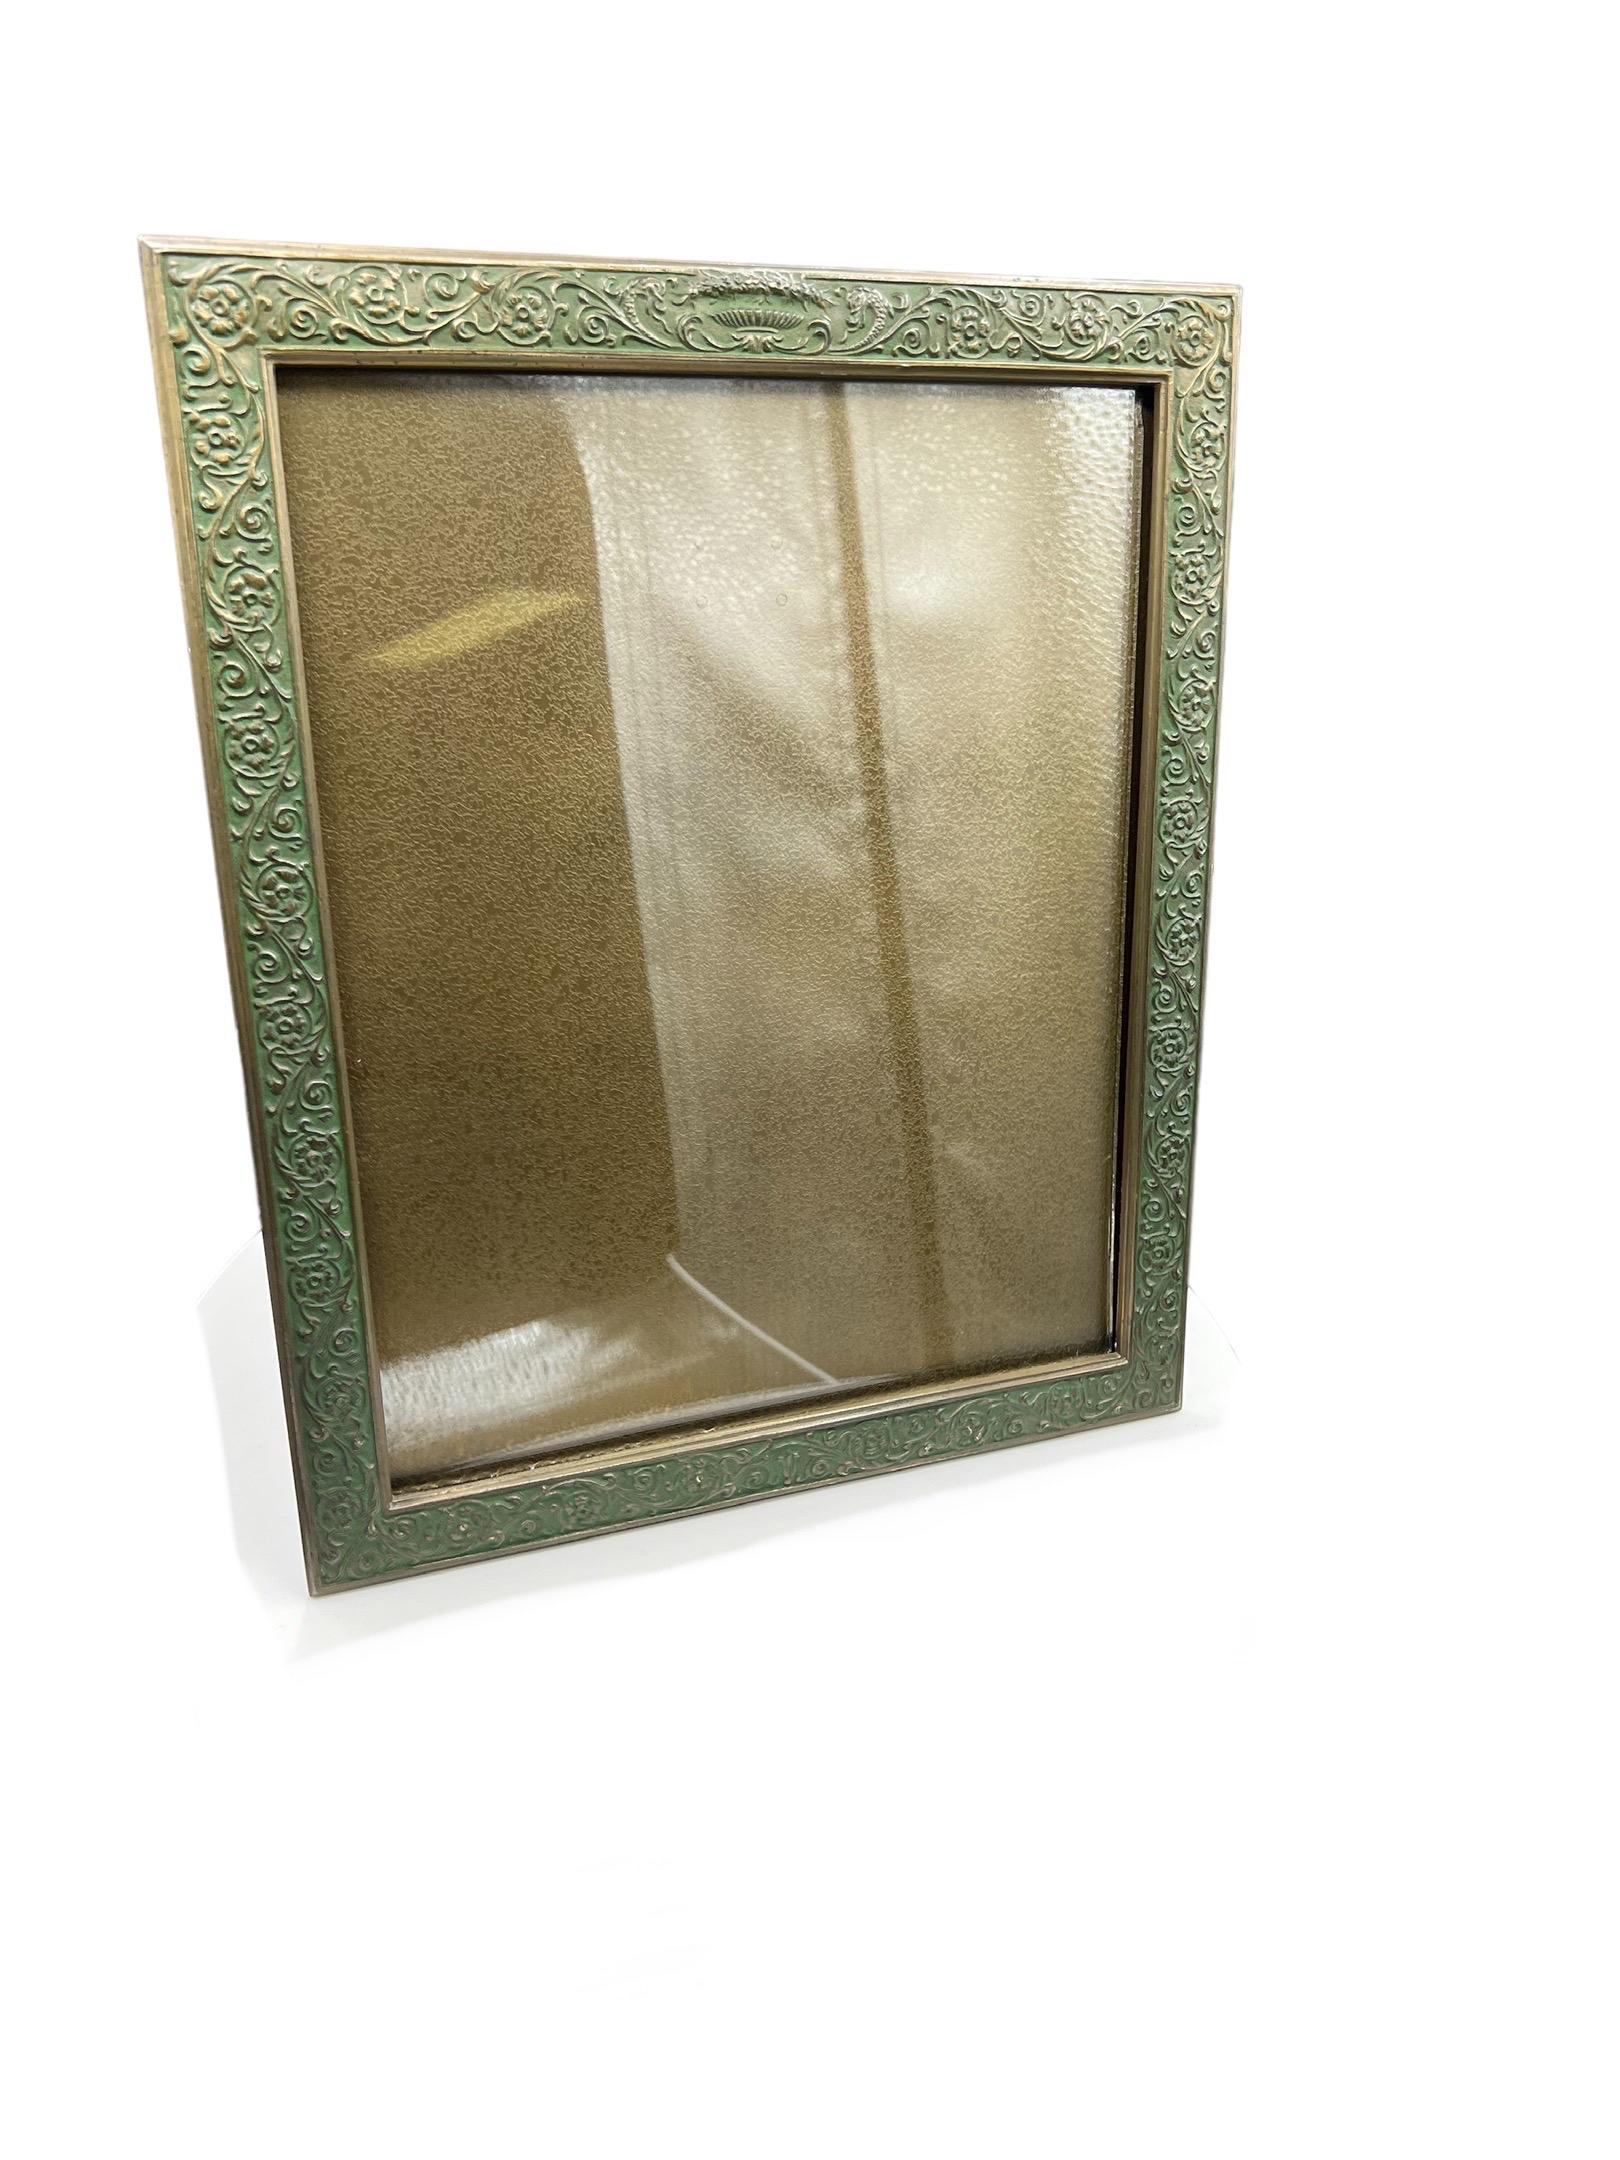 American Tiffany Studios gilt-bronze picture frame, Stamped Tiffany Studios/NY/1611. For Sale